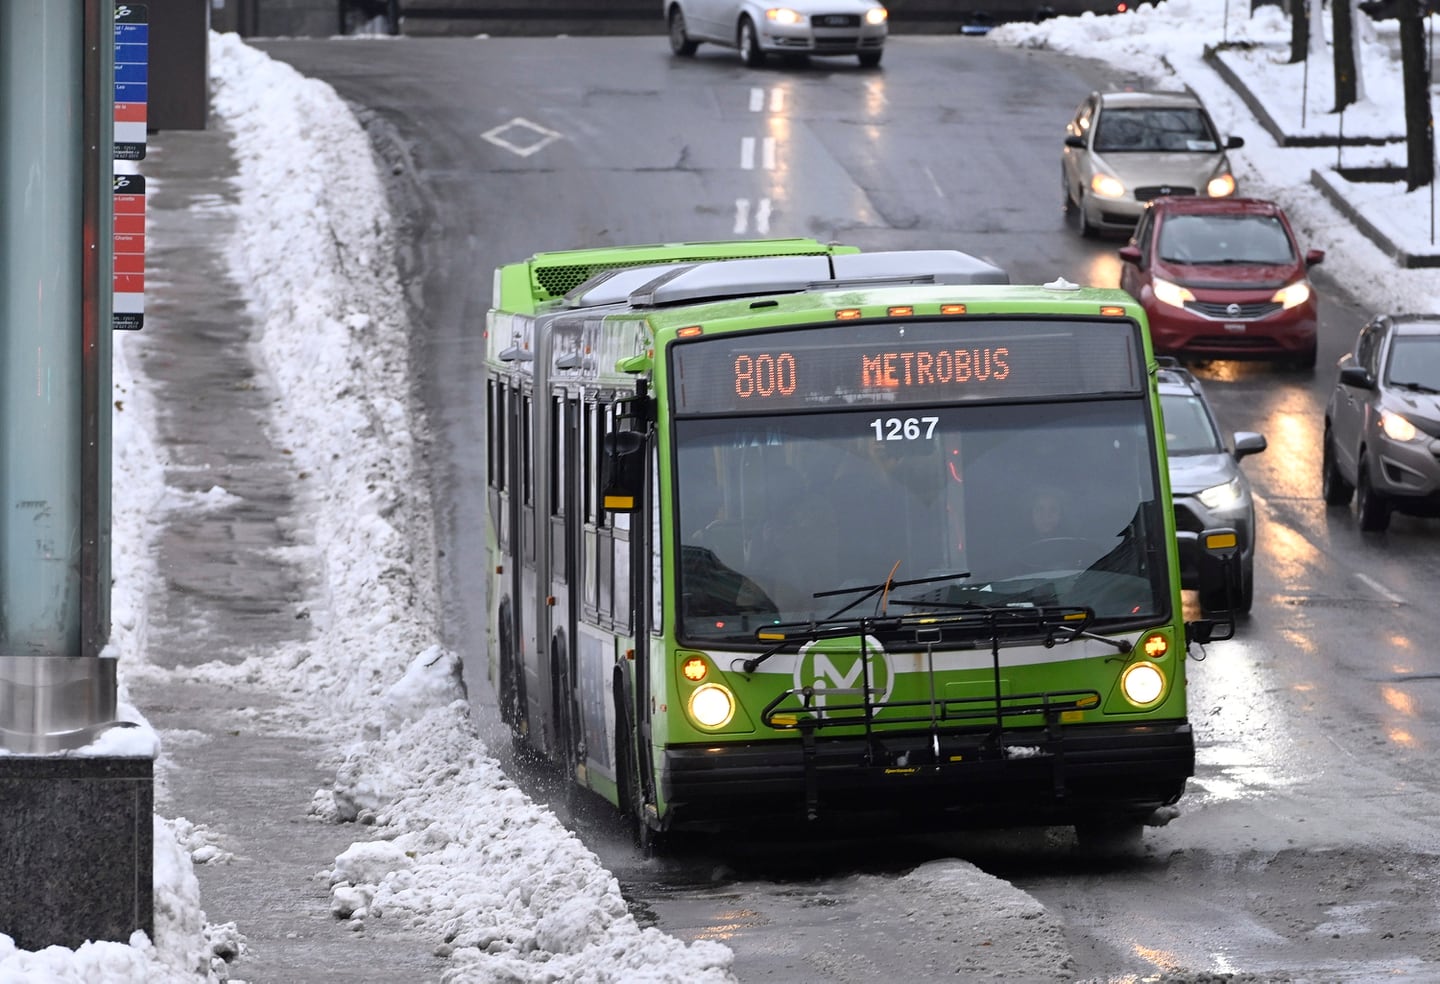 Implementing a structured transit network in Quebec City involves many technical challenges.